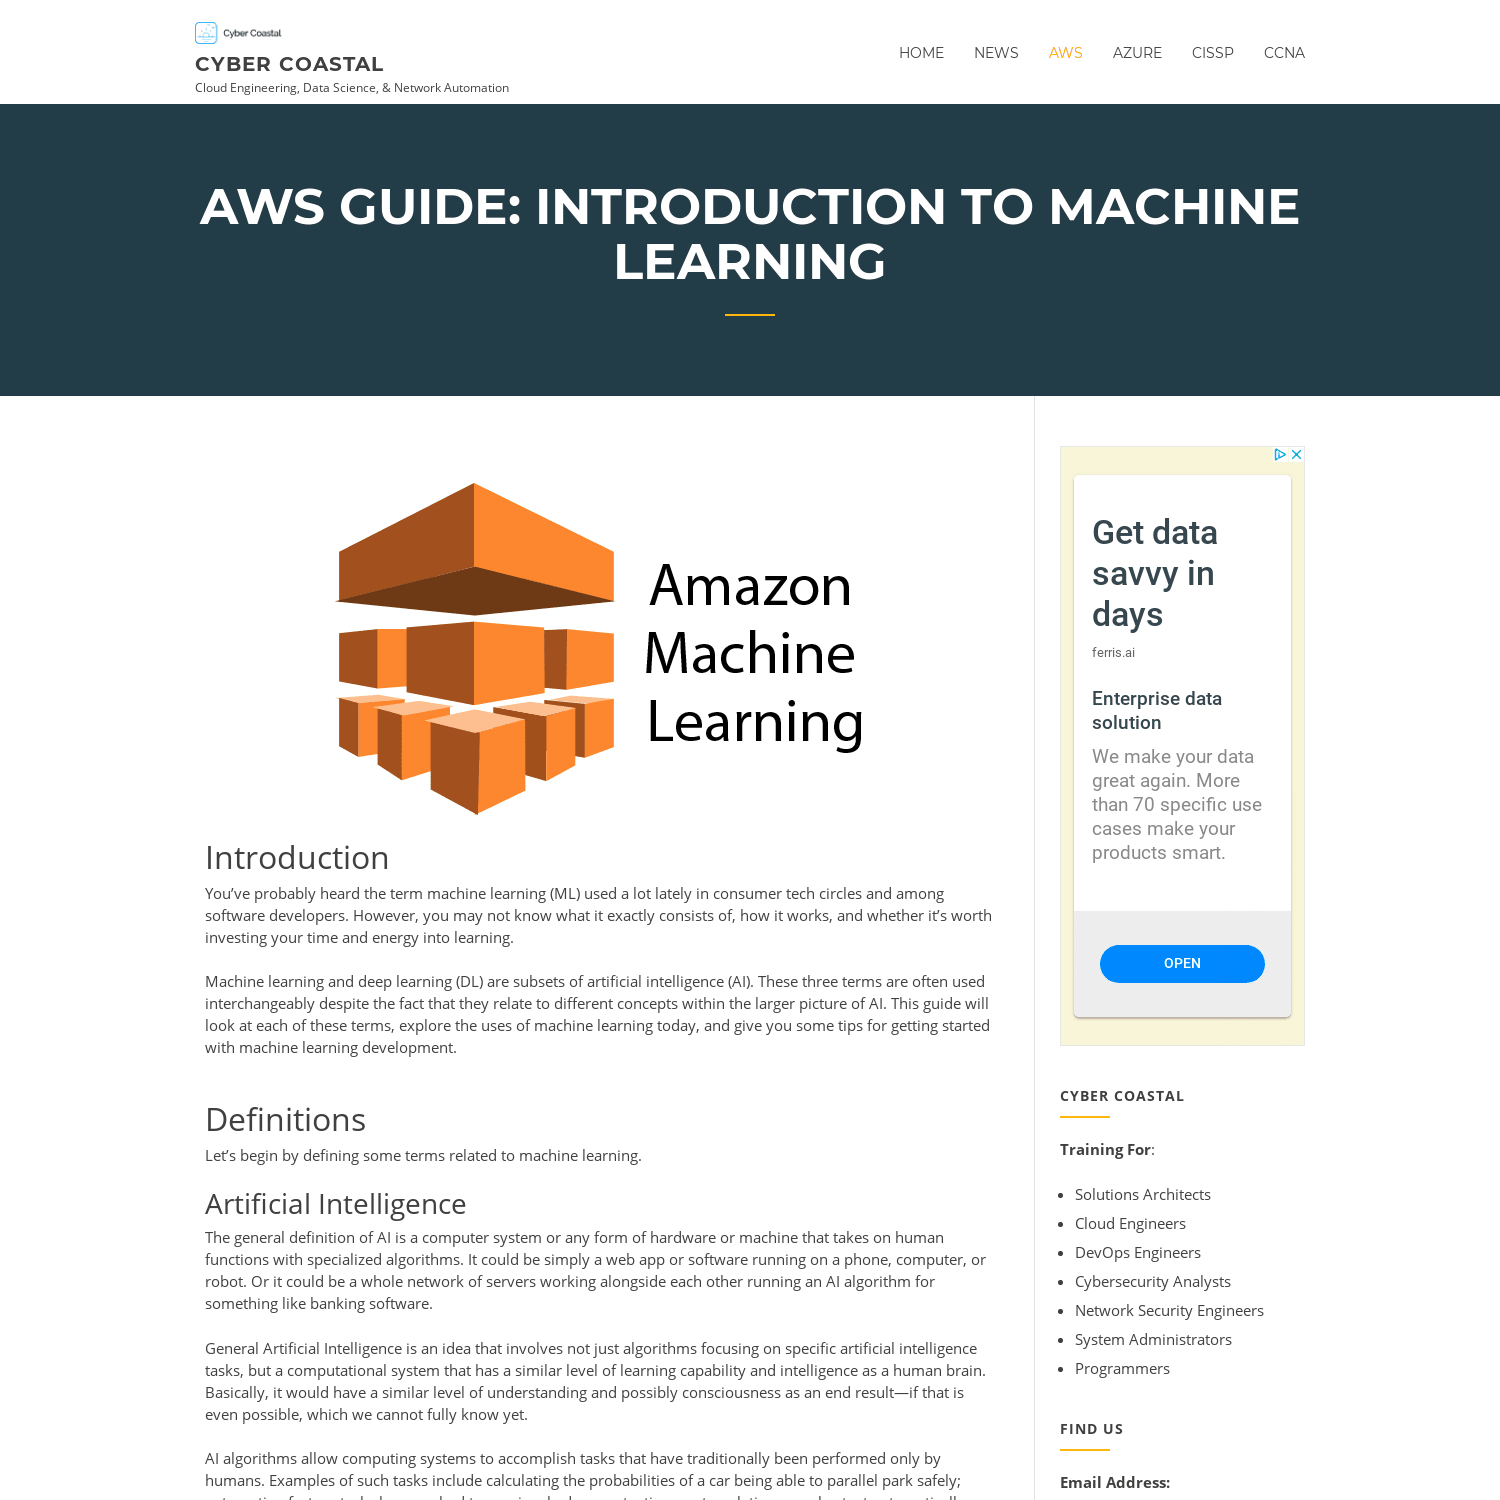 AWS Guide: Introduction to Machine Learning